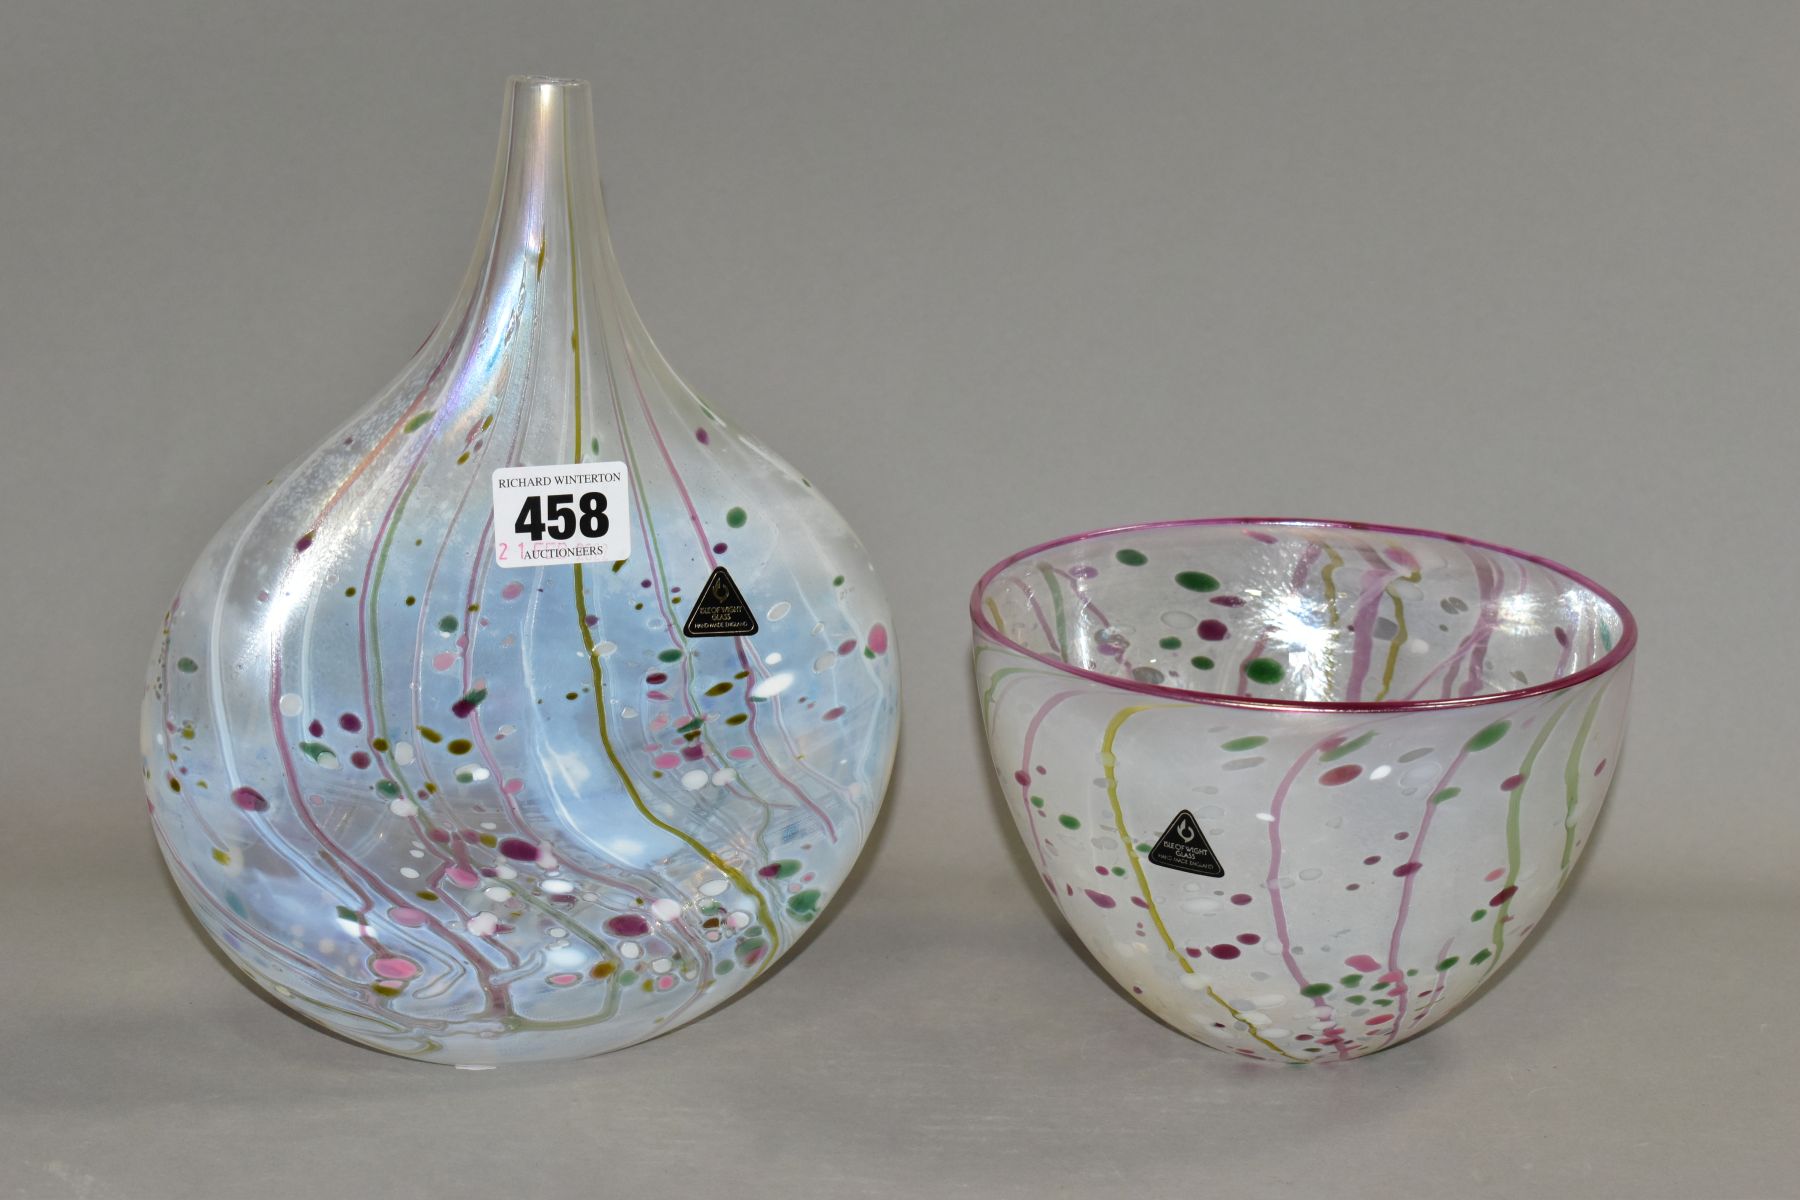 TWO PIECES OF ISLE OF WIGHT GLASS, both decorated with speckled and streaked pink and green design